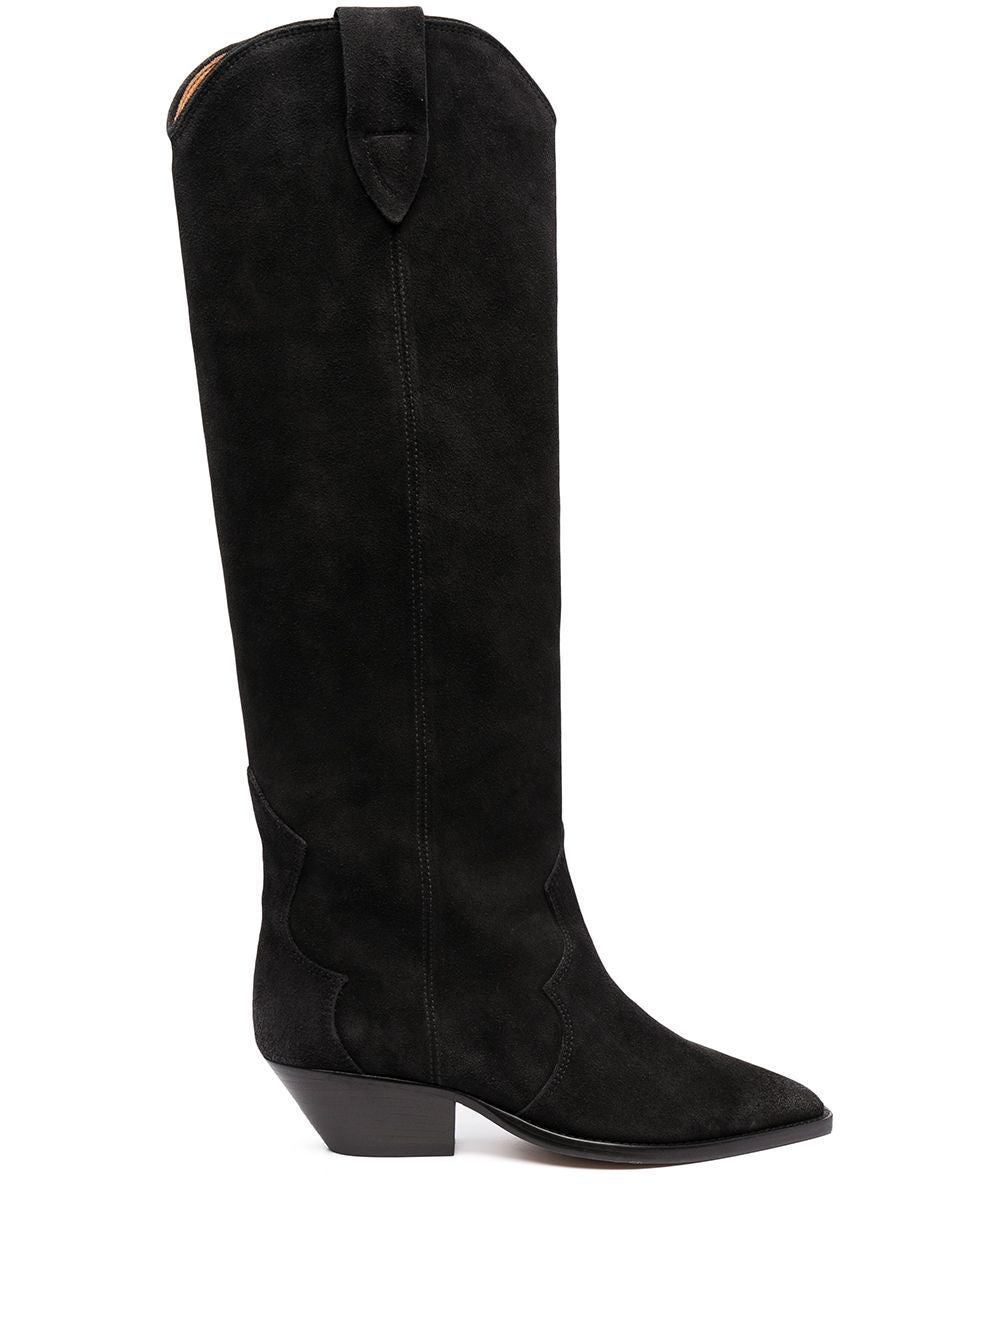 Stylish Black Leather Ankle Boots for Women